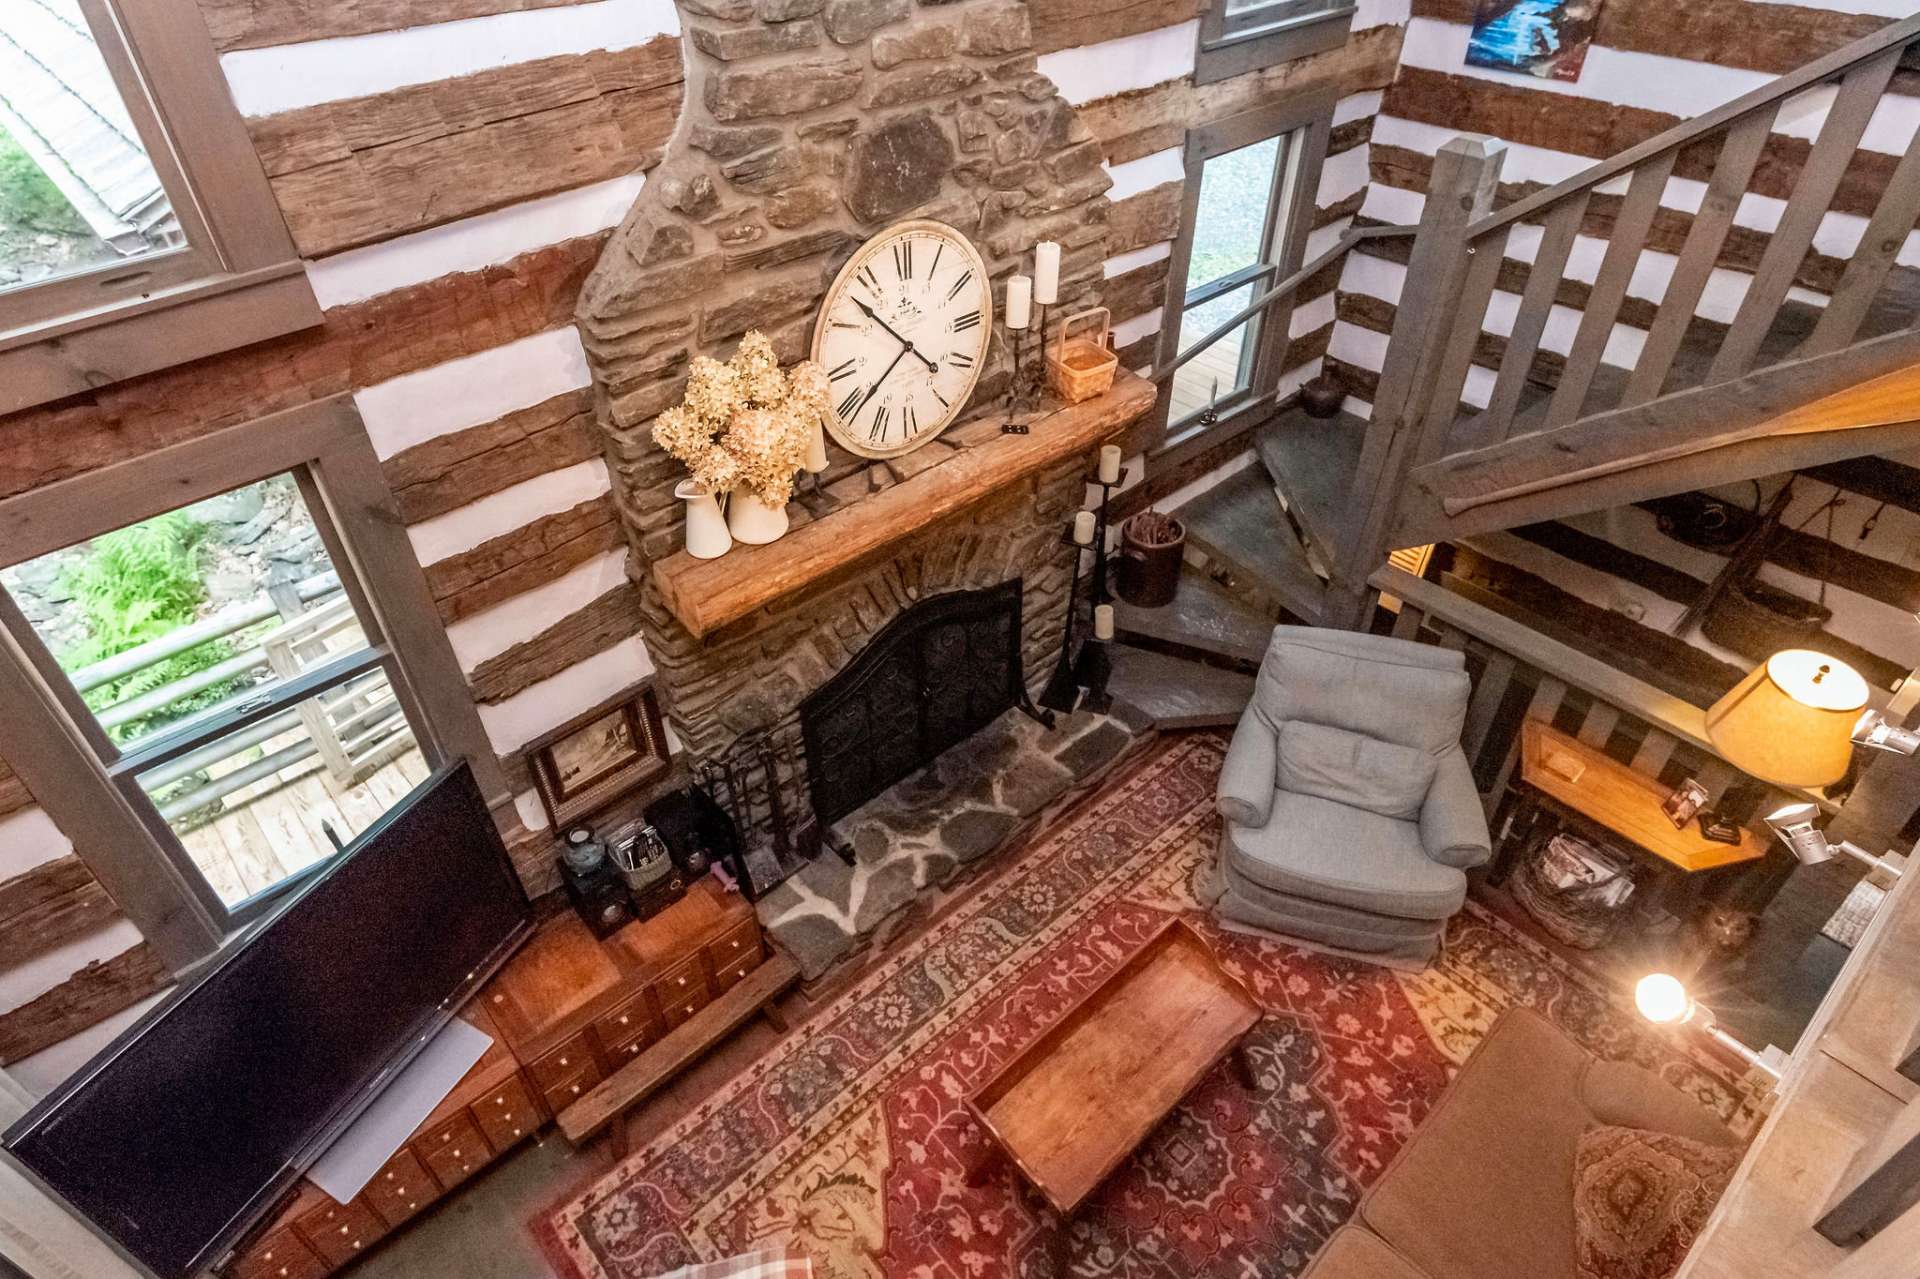 The open loft offers a birds eye view of the living room and massive two story fireplace.